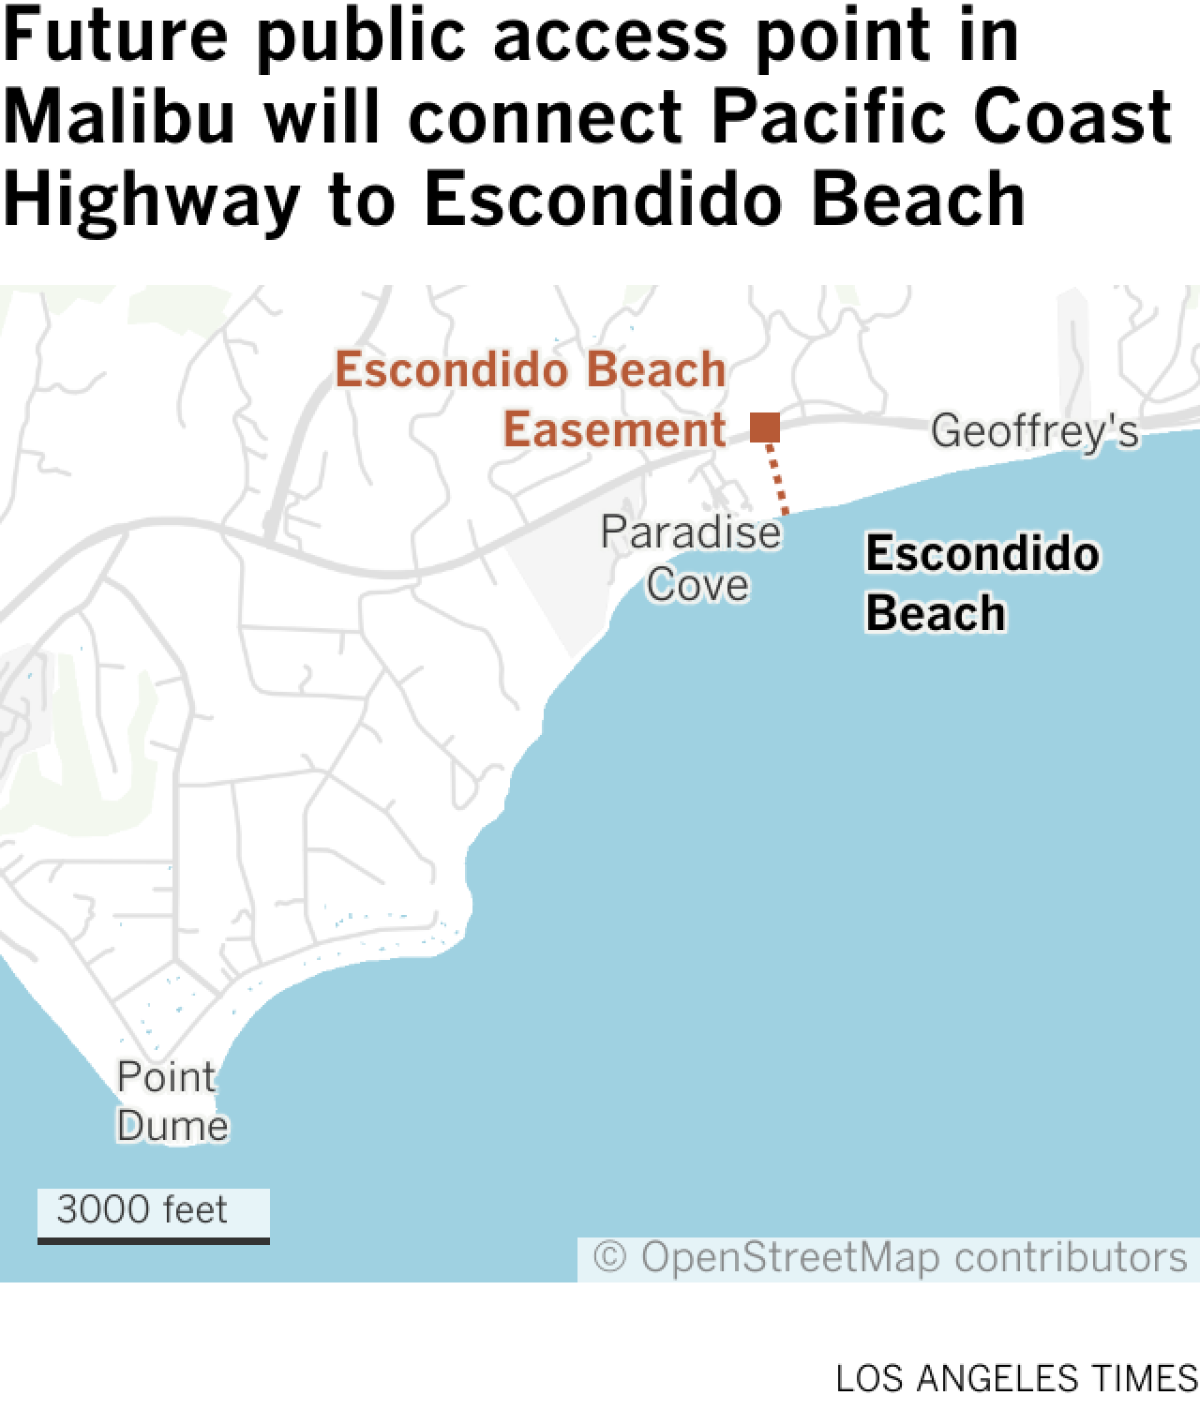 Map shows the location of the easement on the Pacific Coast Highway, which will connect to Escondido Beach between Geoffrey's and Paradise Cove. 